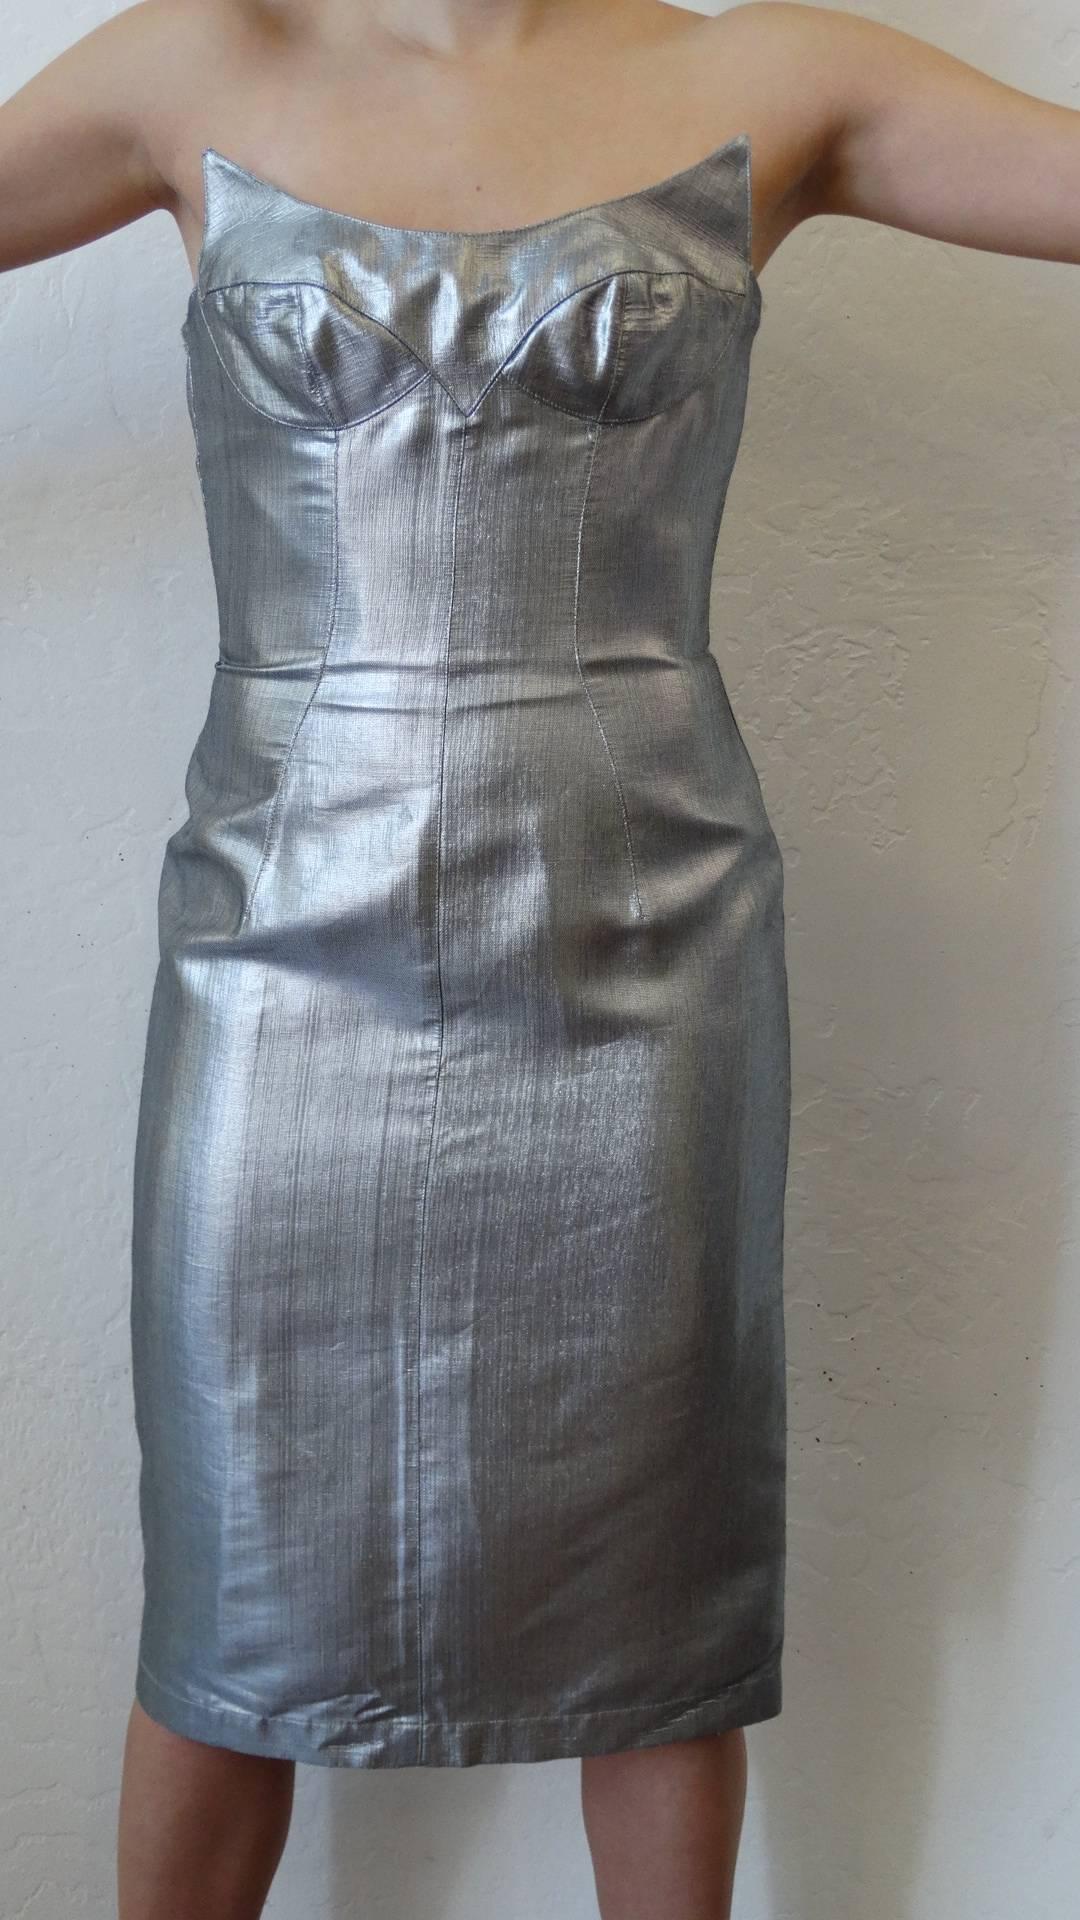  Thierry Mugler Couture Silver Sculpture Dress, Spring 1989 For Sale 2